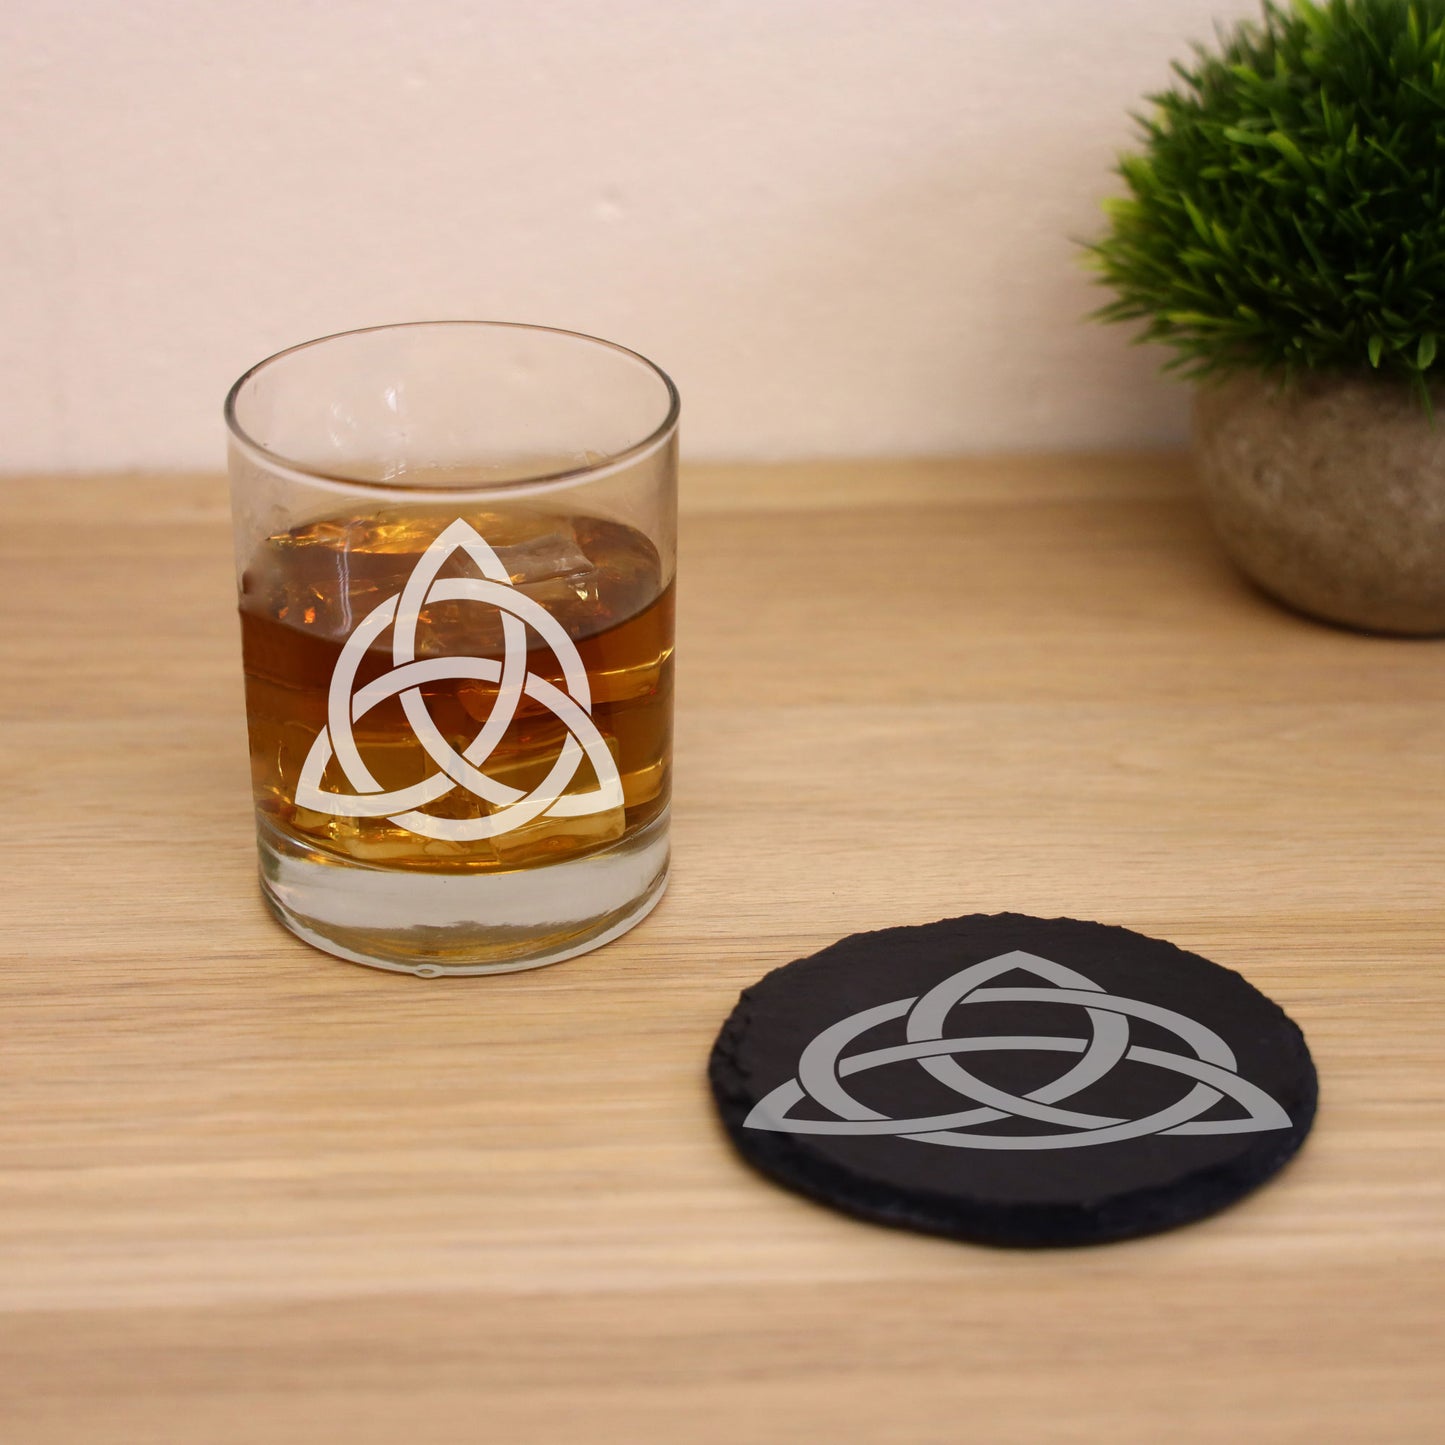 Celtic Knot Engraved Whisky Glass and/or Coaster Set  - Always Looking Good - Glass & Round Coaster Set  